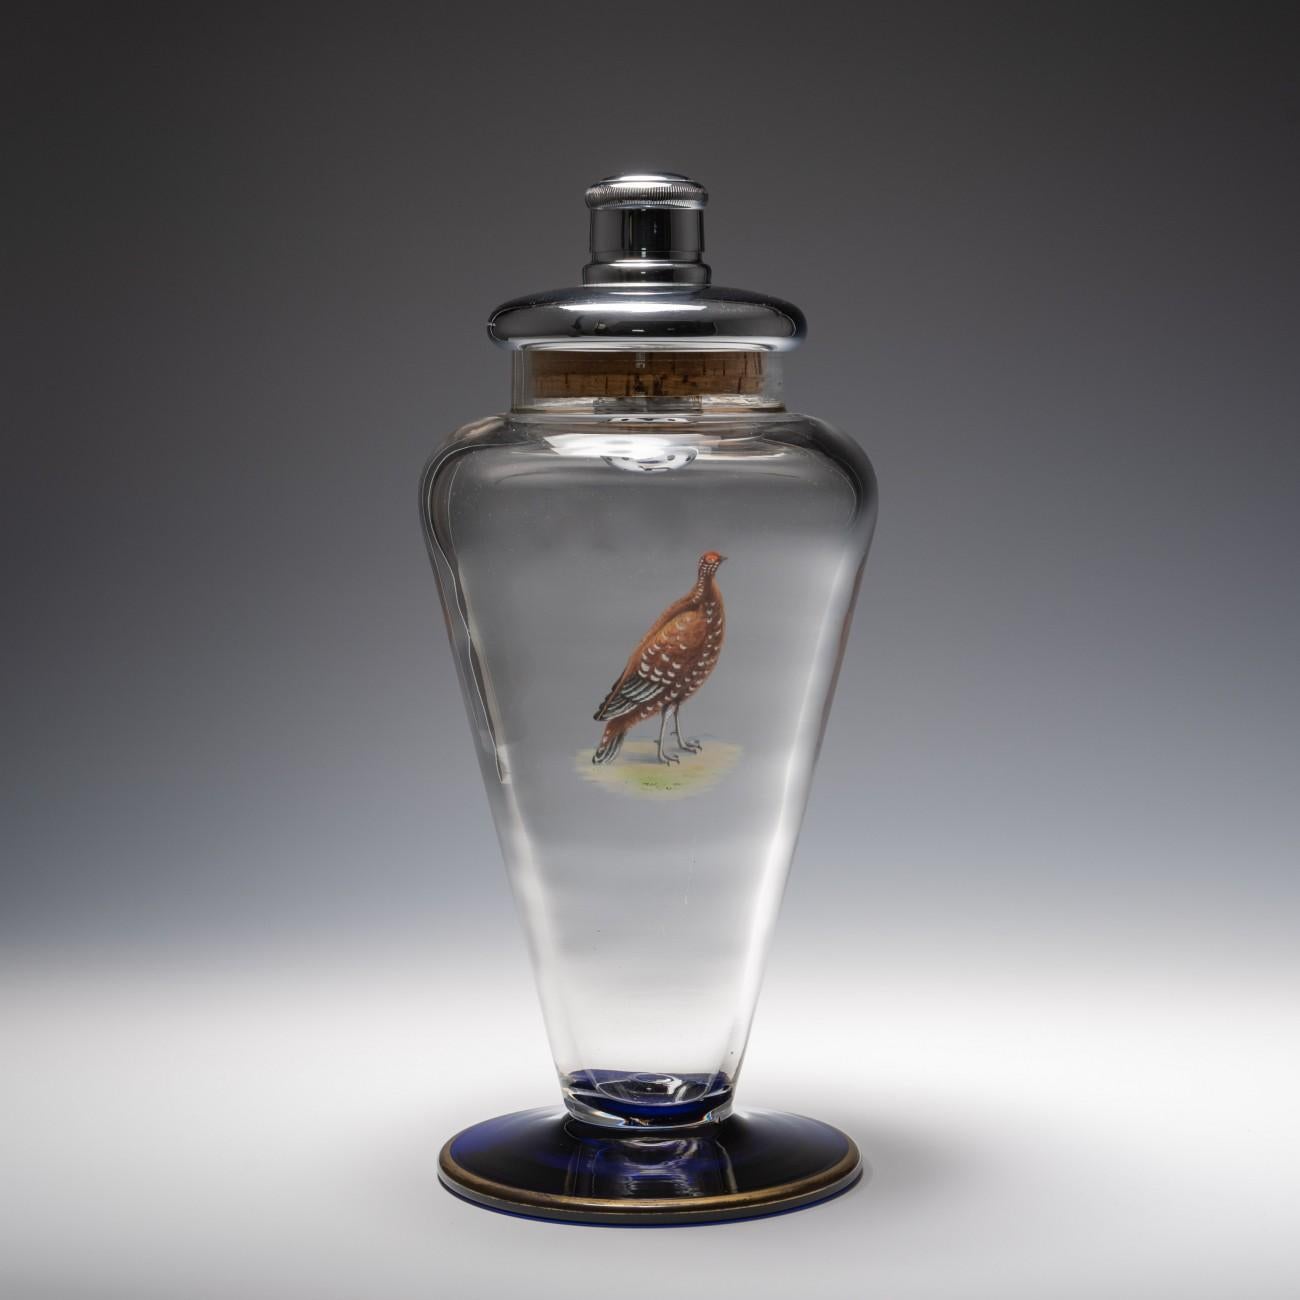 Spectacular cocktail shaker with red grouse motif and cobalt blue base, circa 1940. Top has maker's mark, SL and is stamped chromium-plated. Made in England.

Dimensions: 31 cm/12¼ inches (height) x 14.5 cm/5¾ inches (max diameter)

Bentleys are